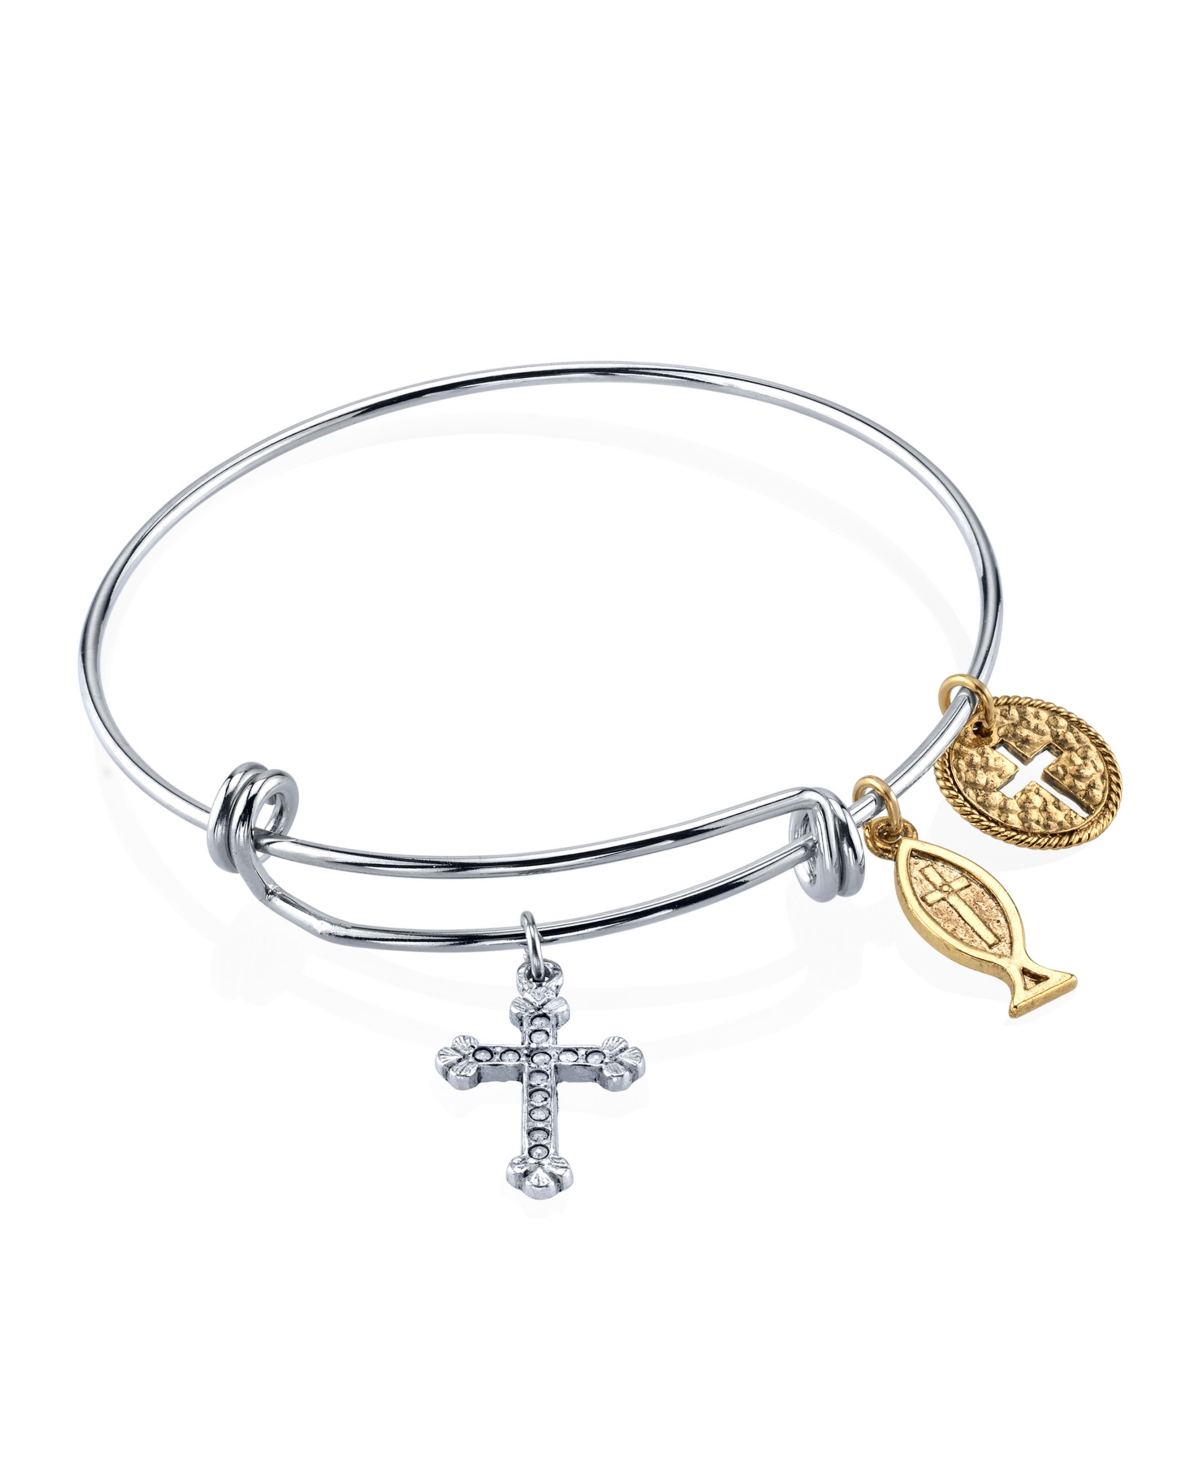 2028 Silver Tone Bangle Bracelet With Cross Fish And Medallion Charms In Yellow